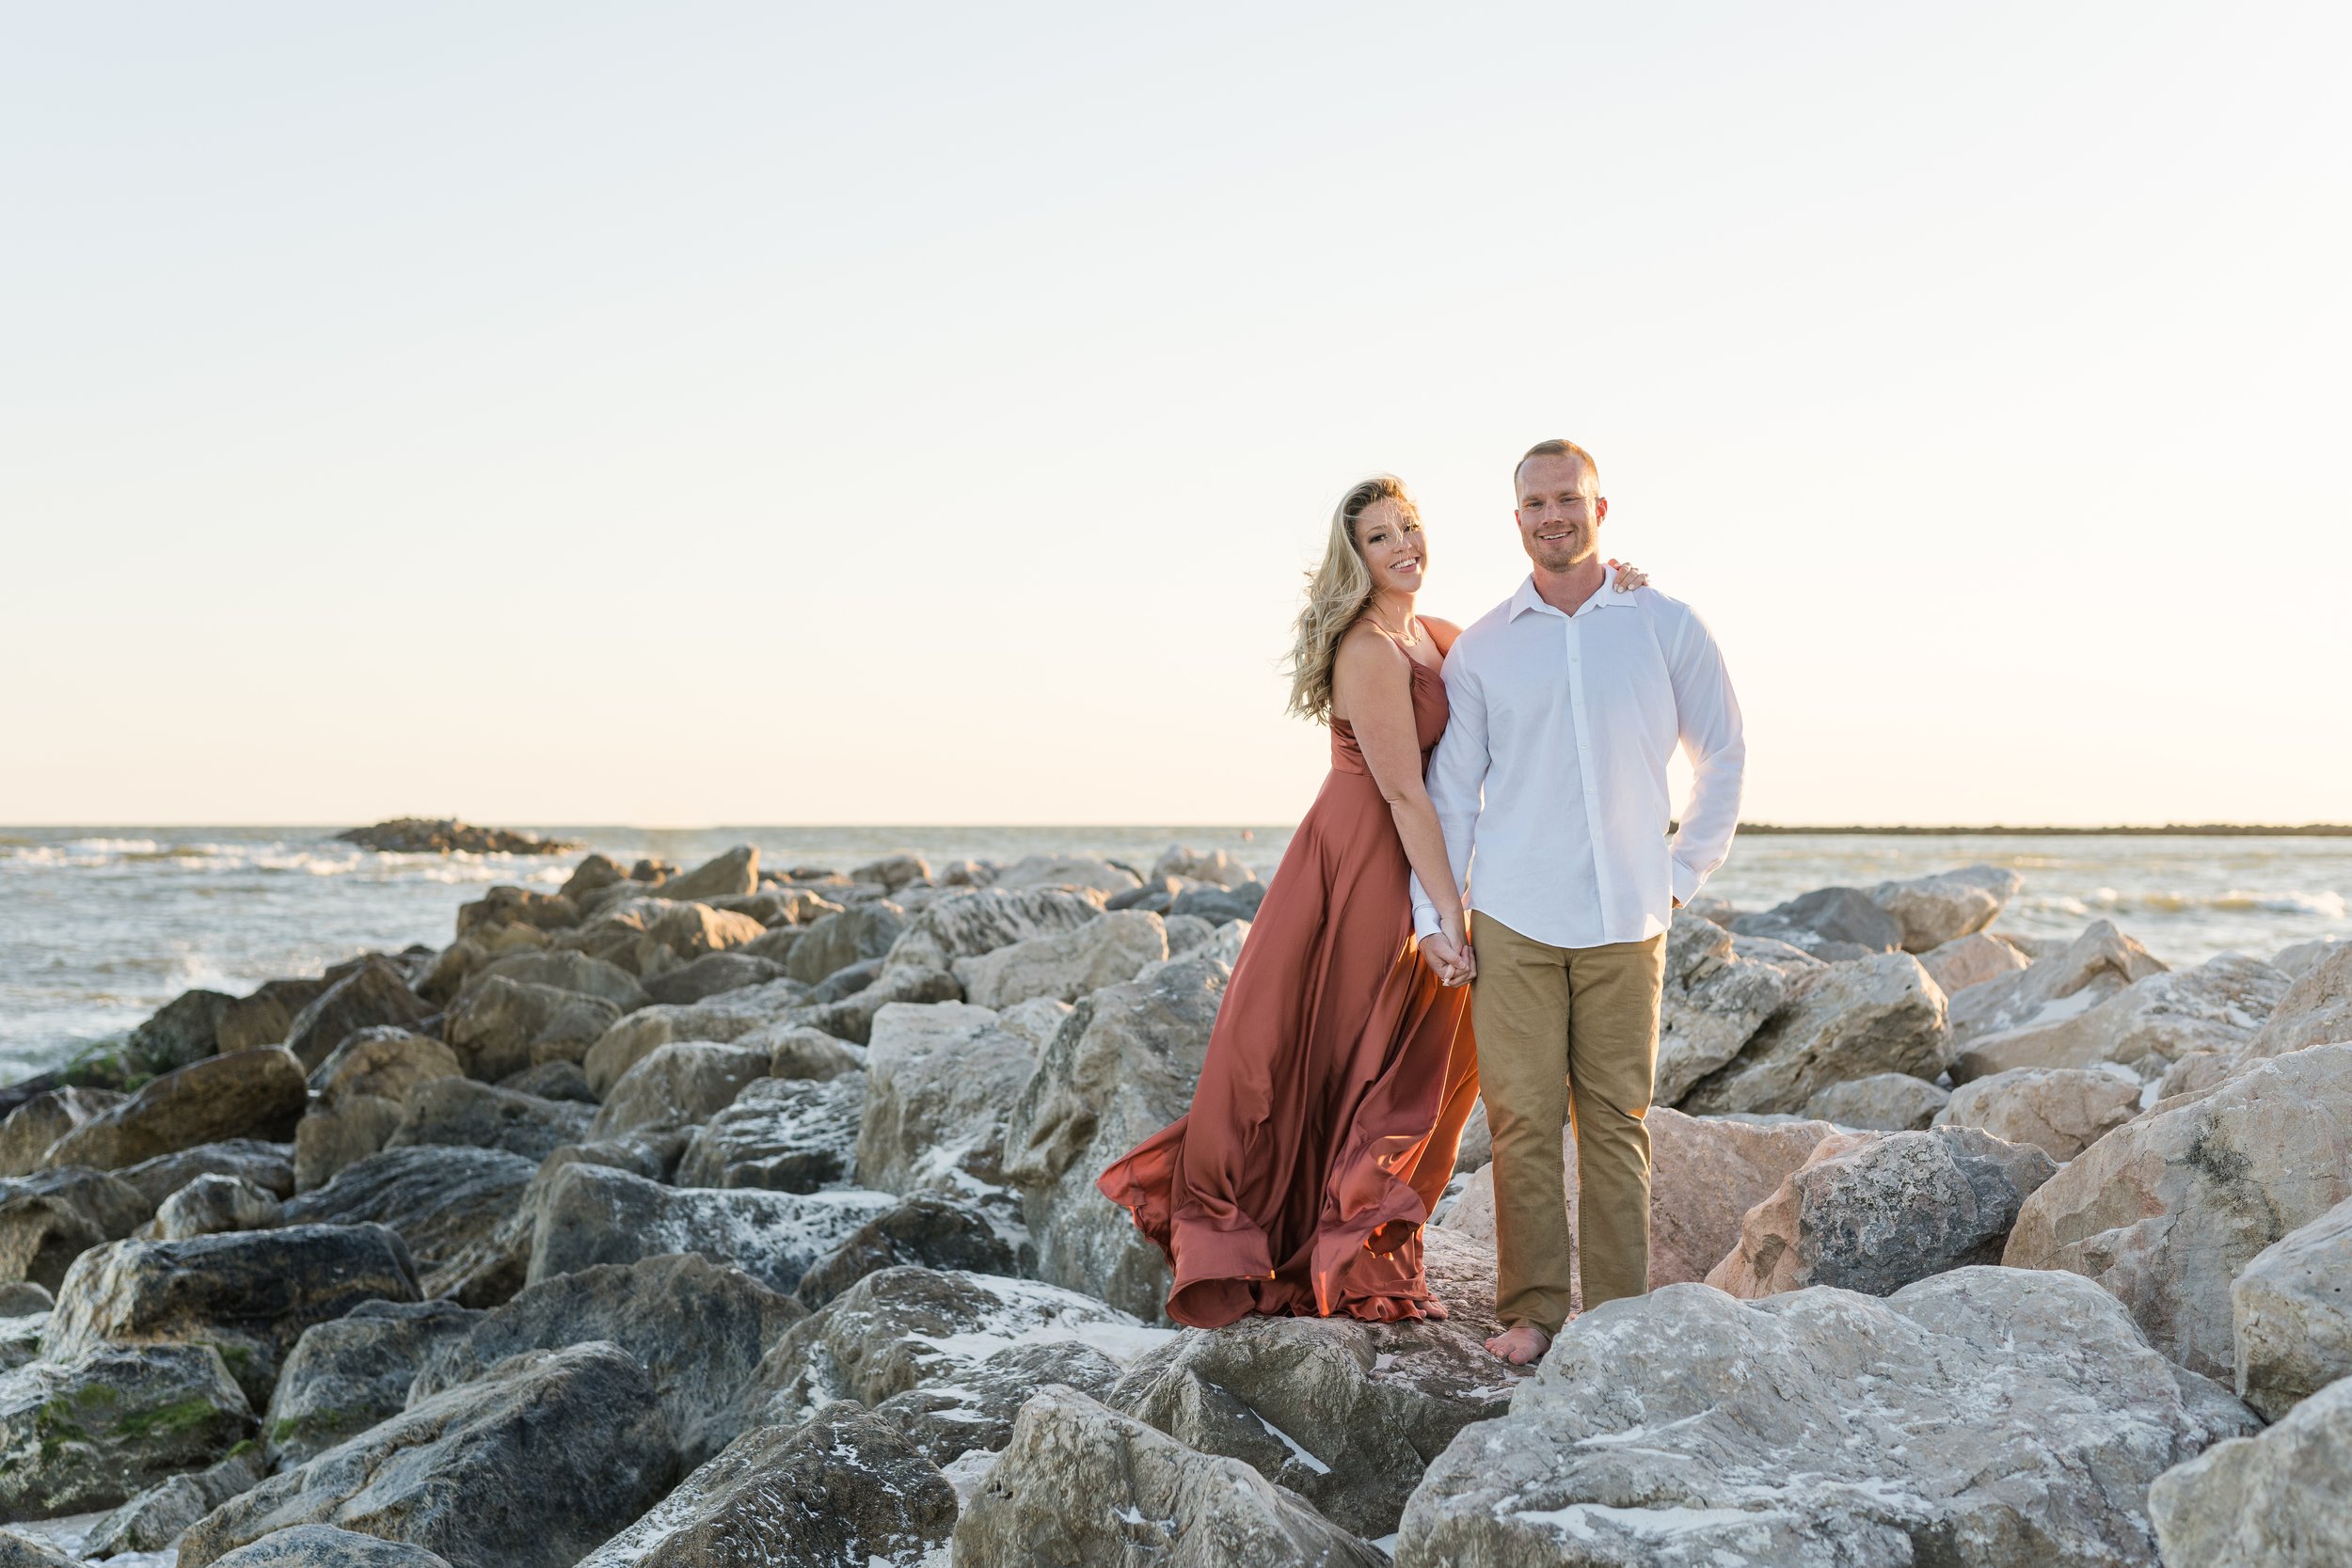 Orange Beach Alabama (The Pass Beach) Engagement Photoshoot Session Photographed by Kristen Marcus Photography during golden hour